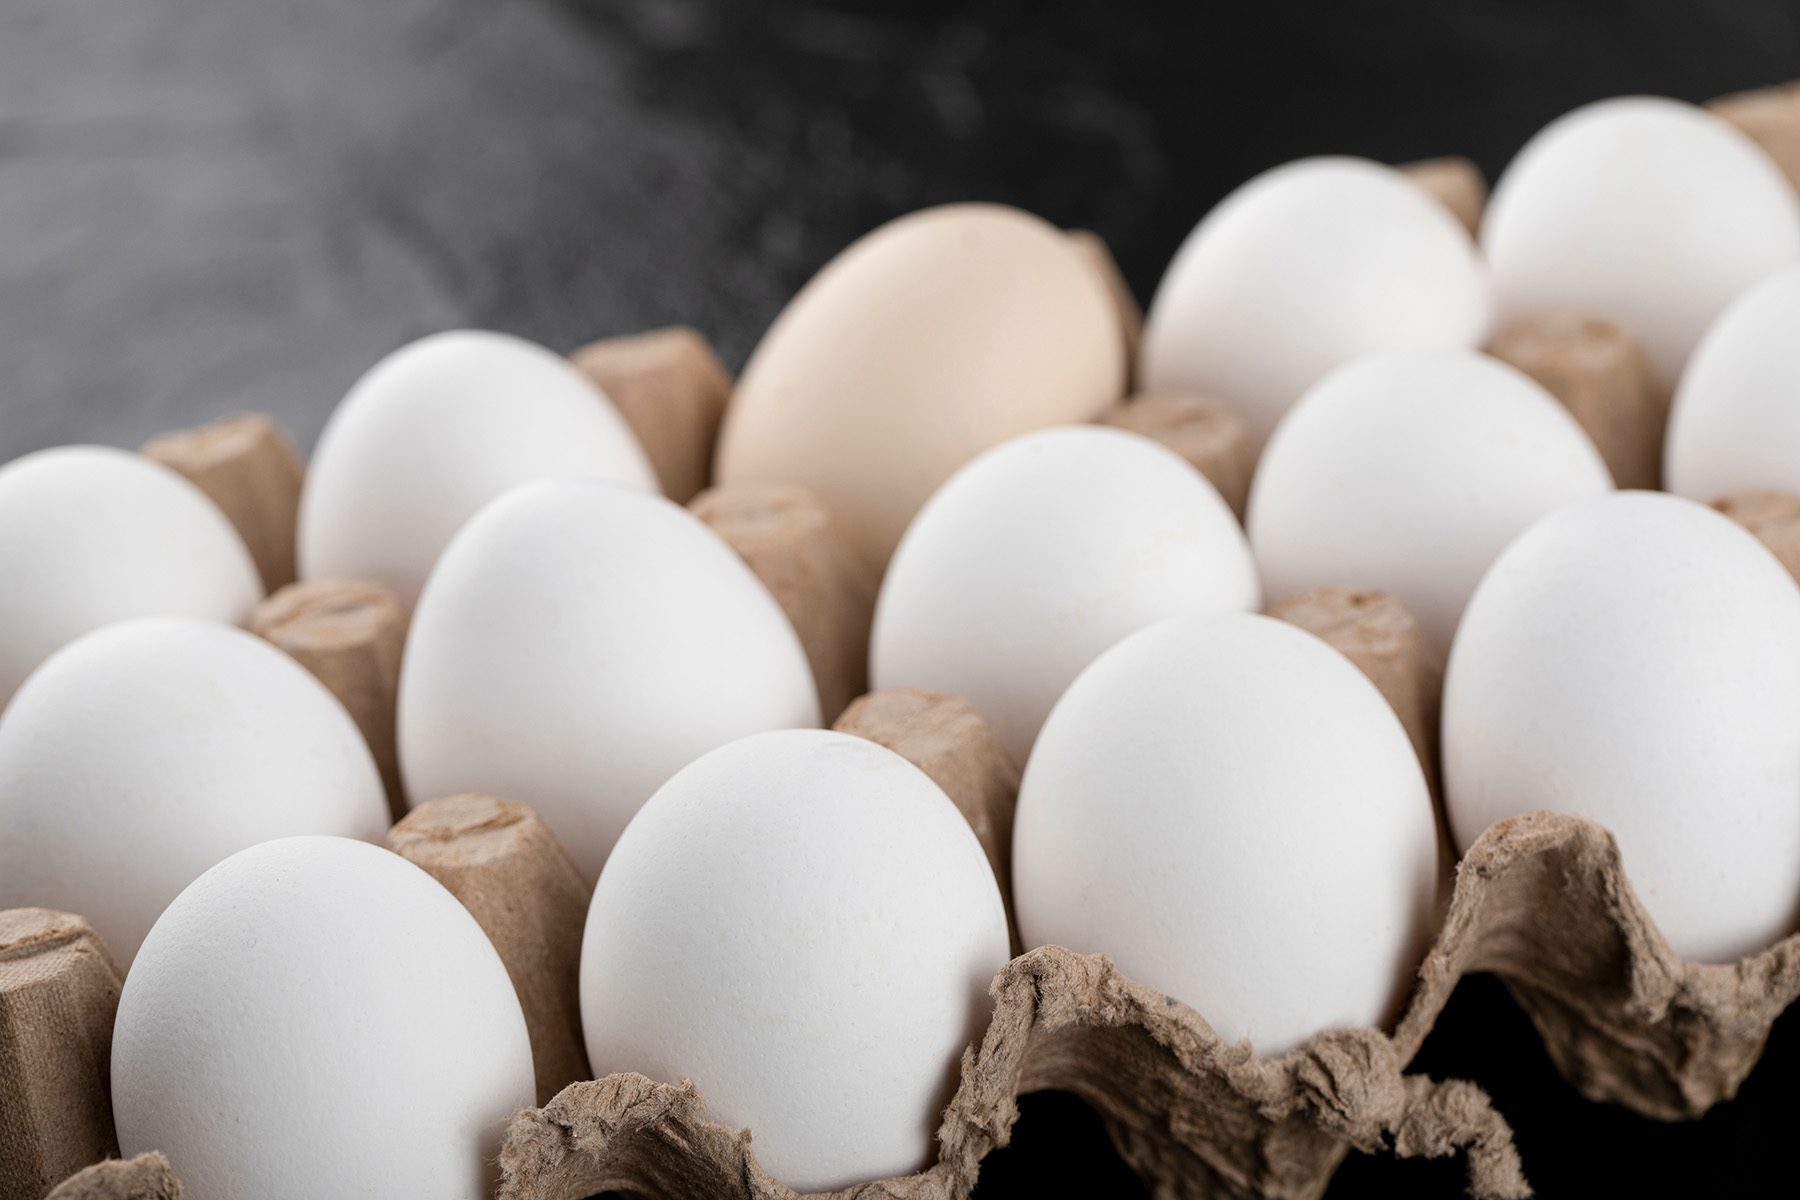 Container of white eggs on black background